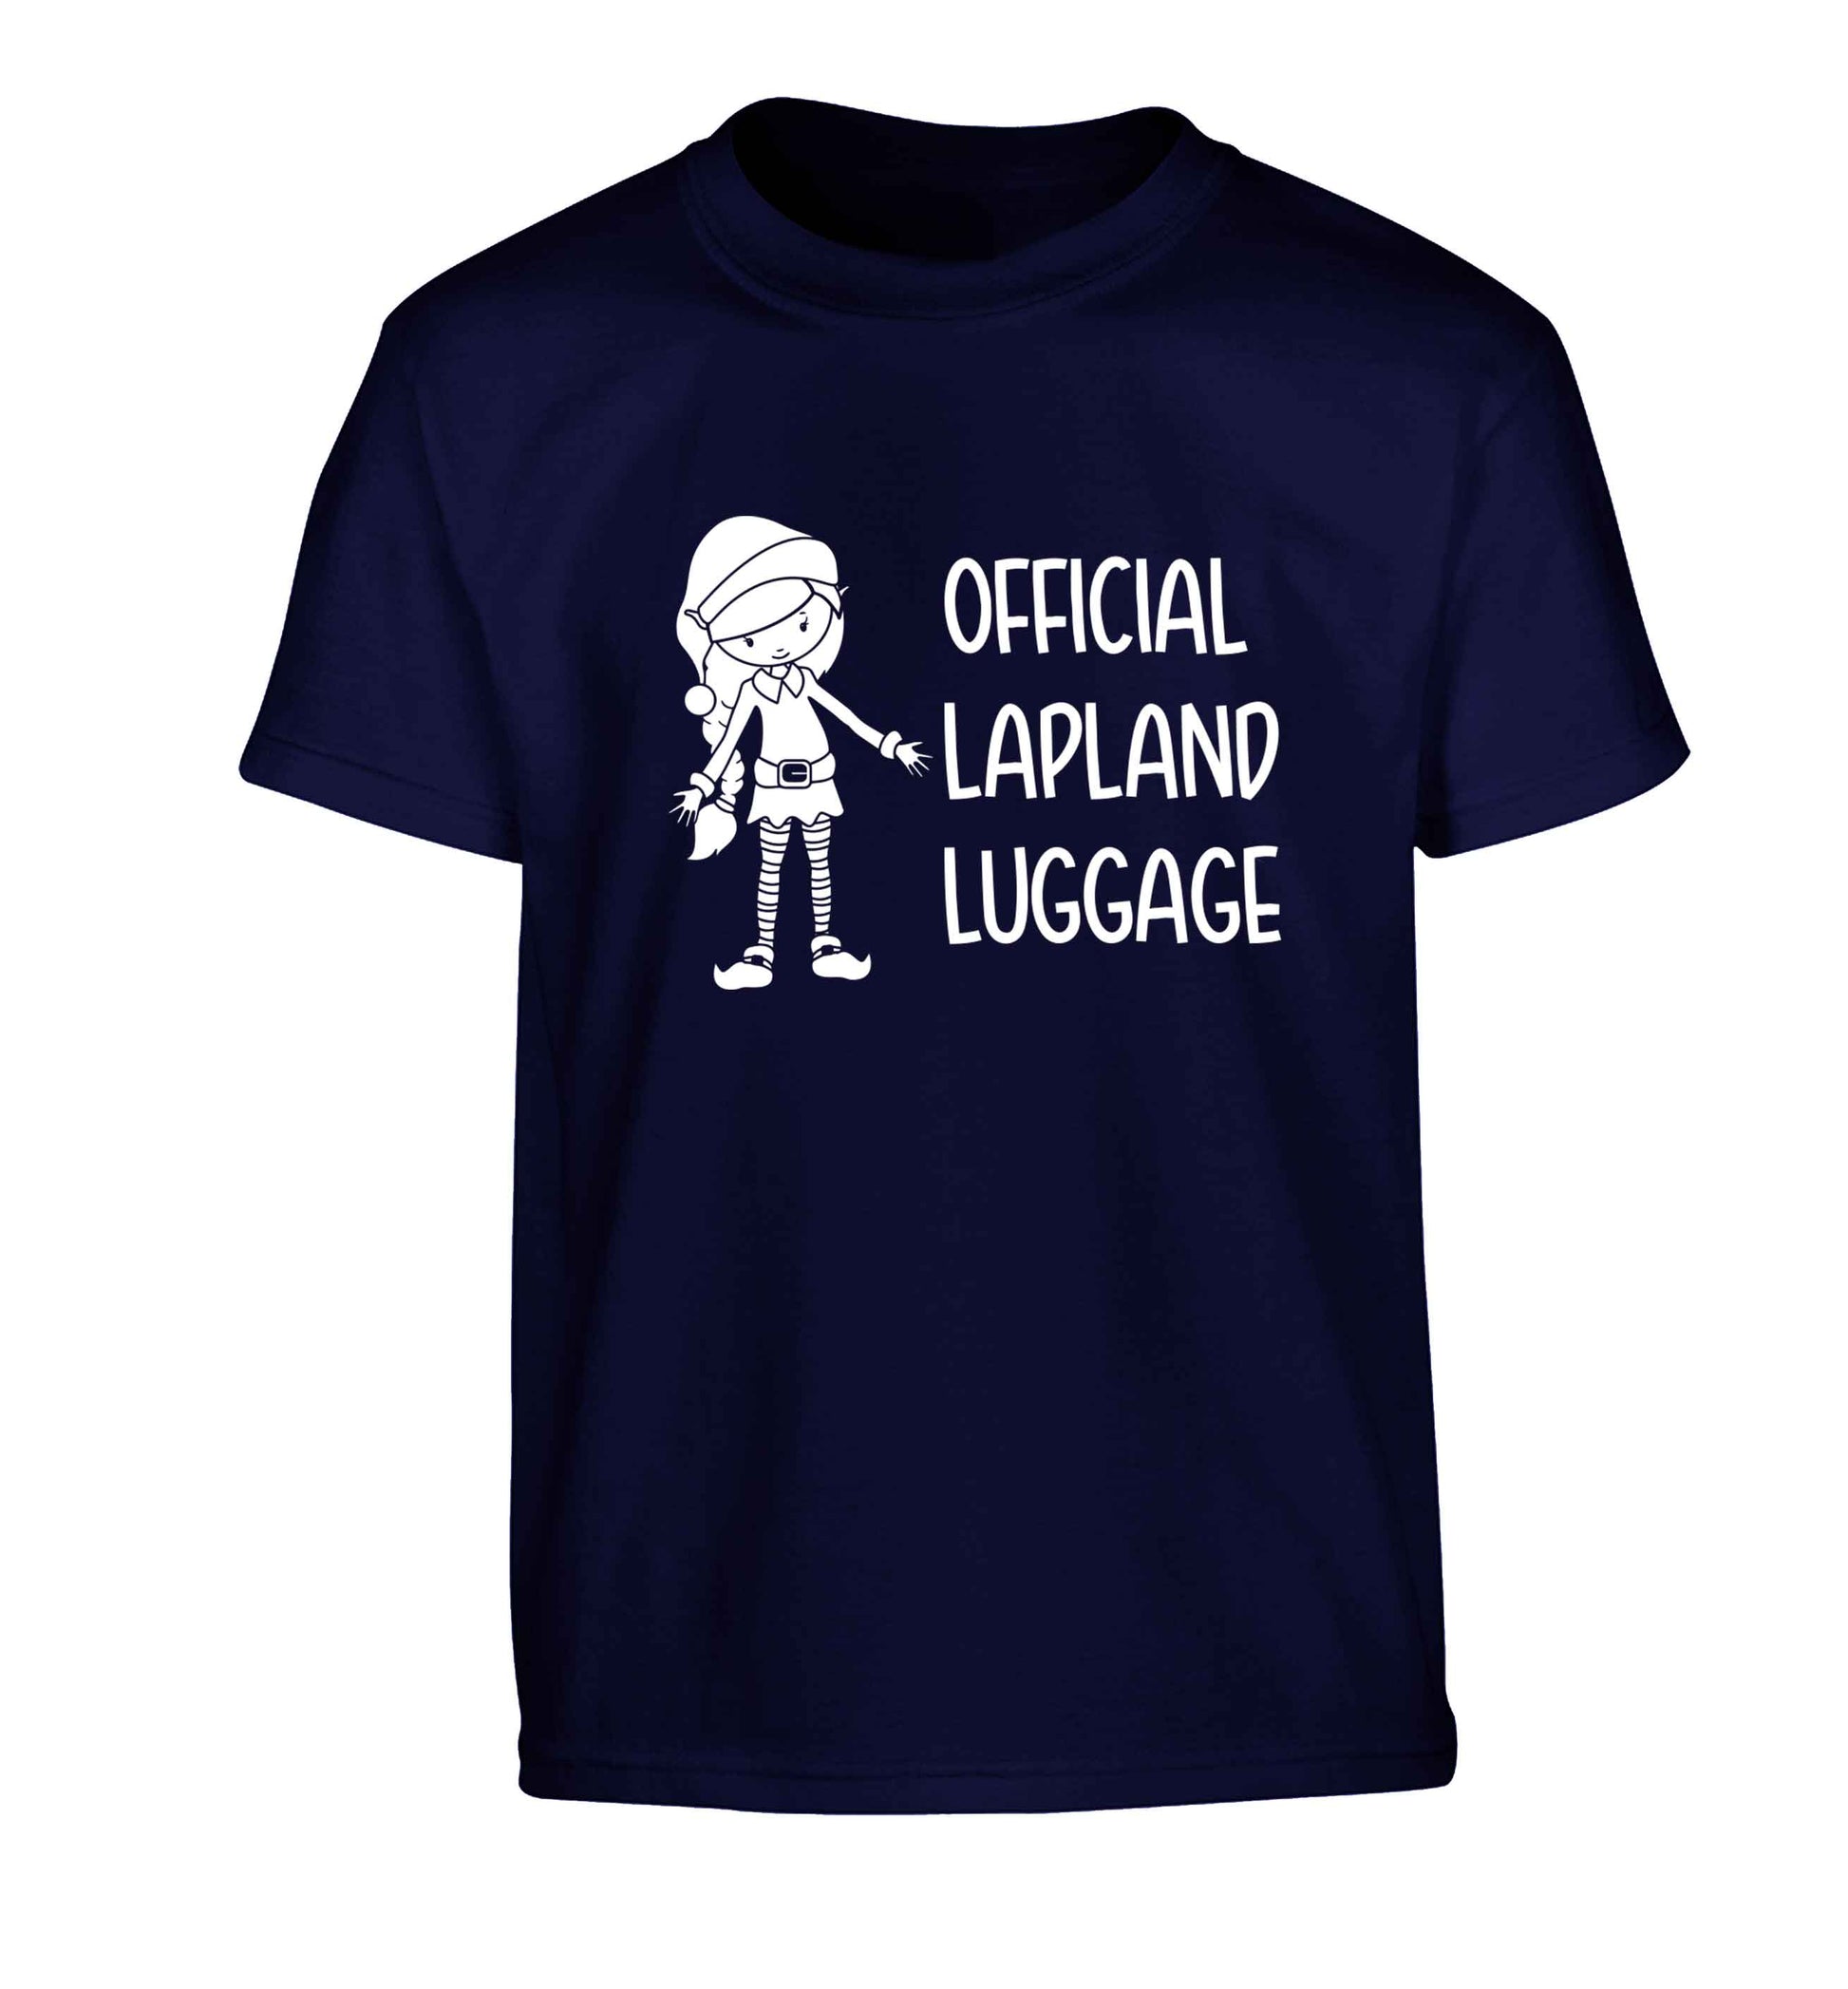 Official lapland luggage - Elf snowflake Children's navy Tshirt 12-13 Years